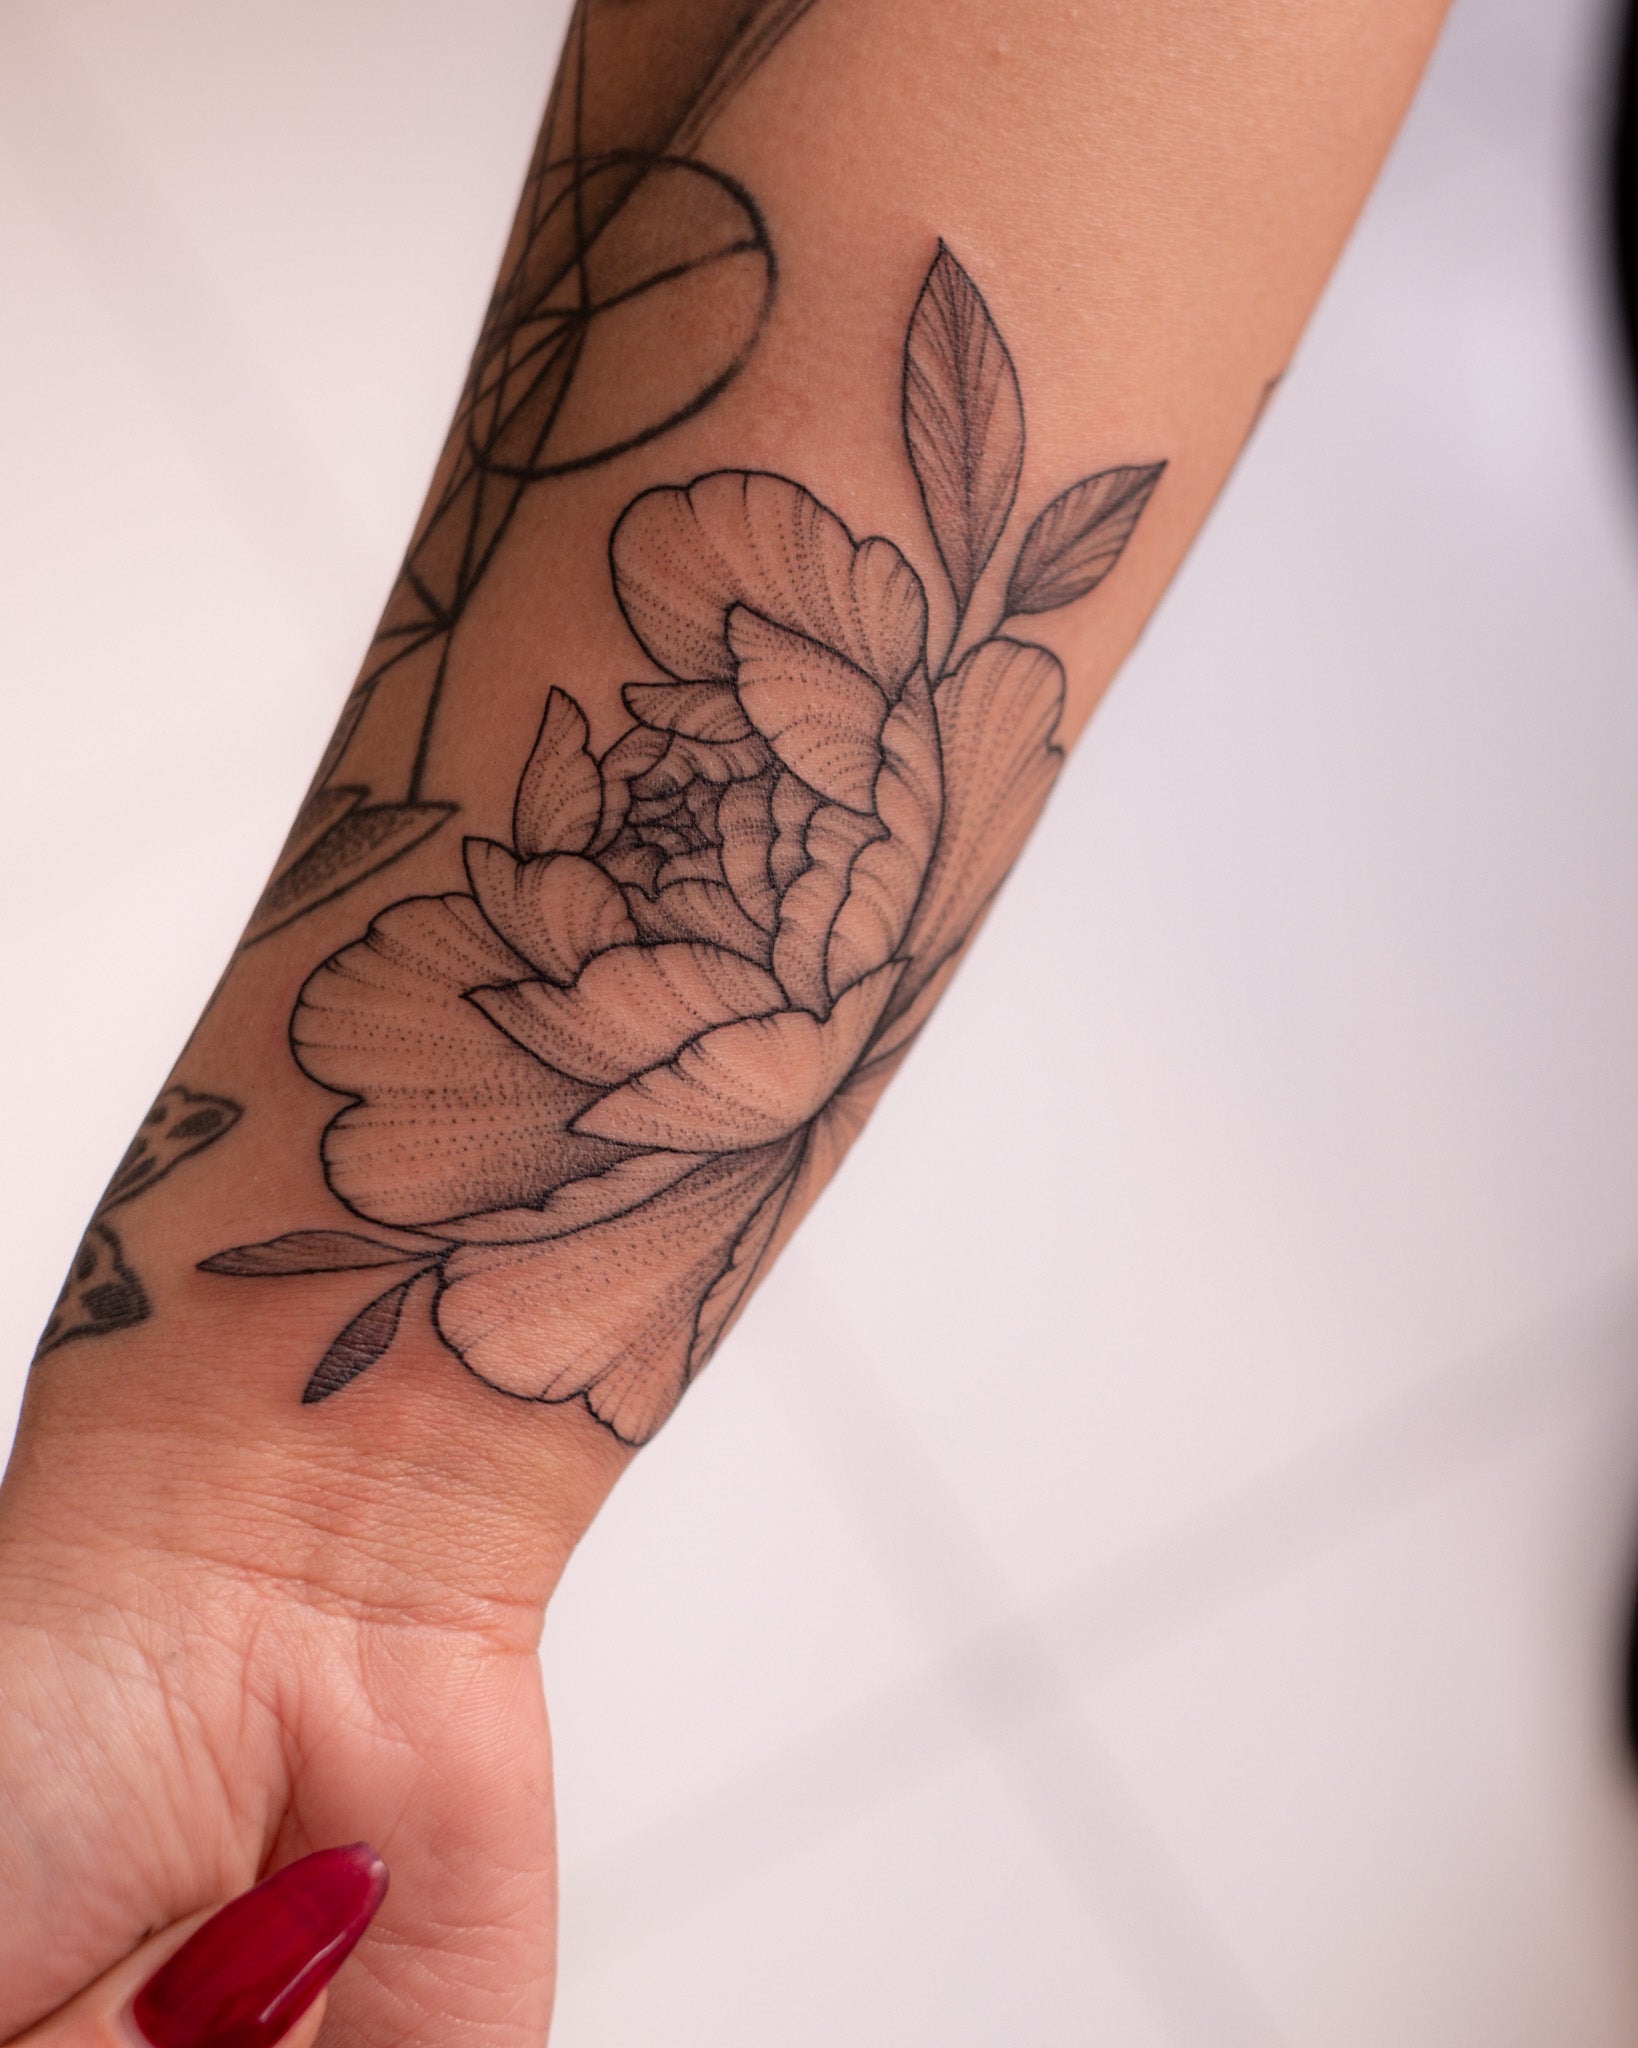 Tattoo Shop Confessions: Color vs. black and grey tattoos